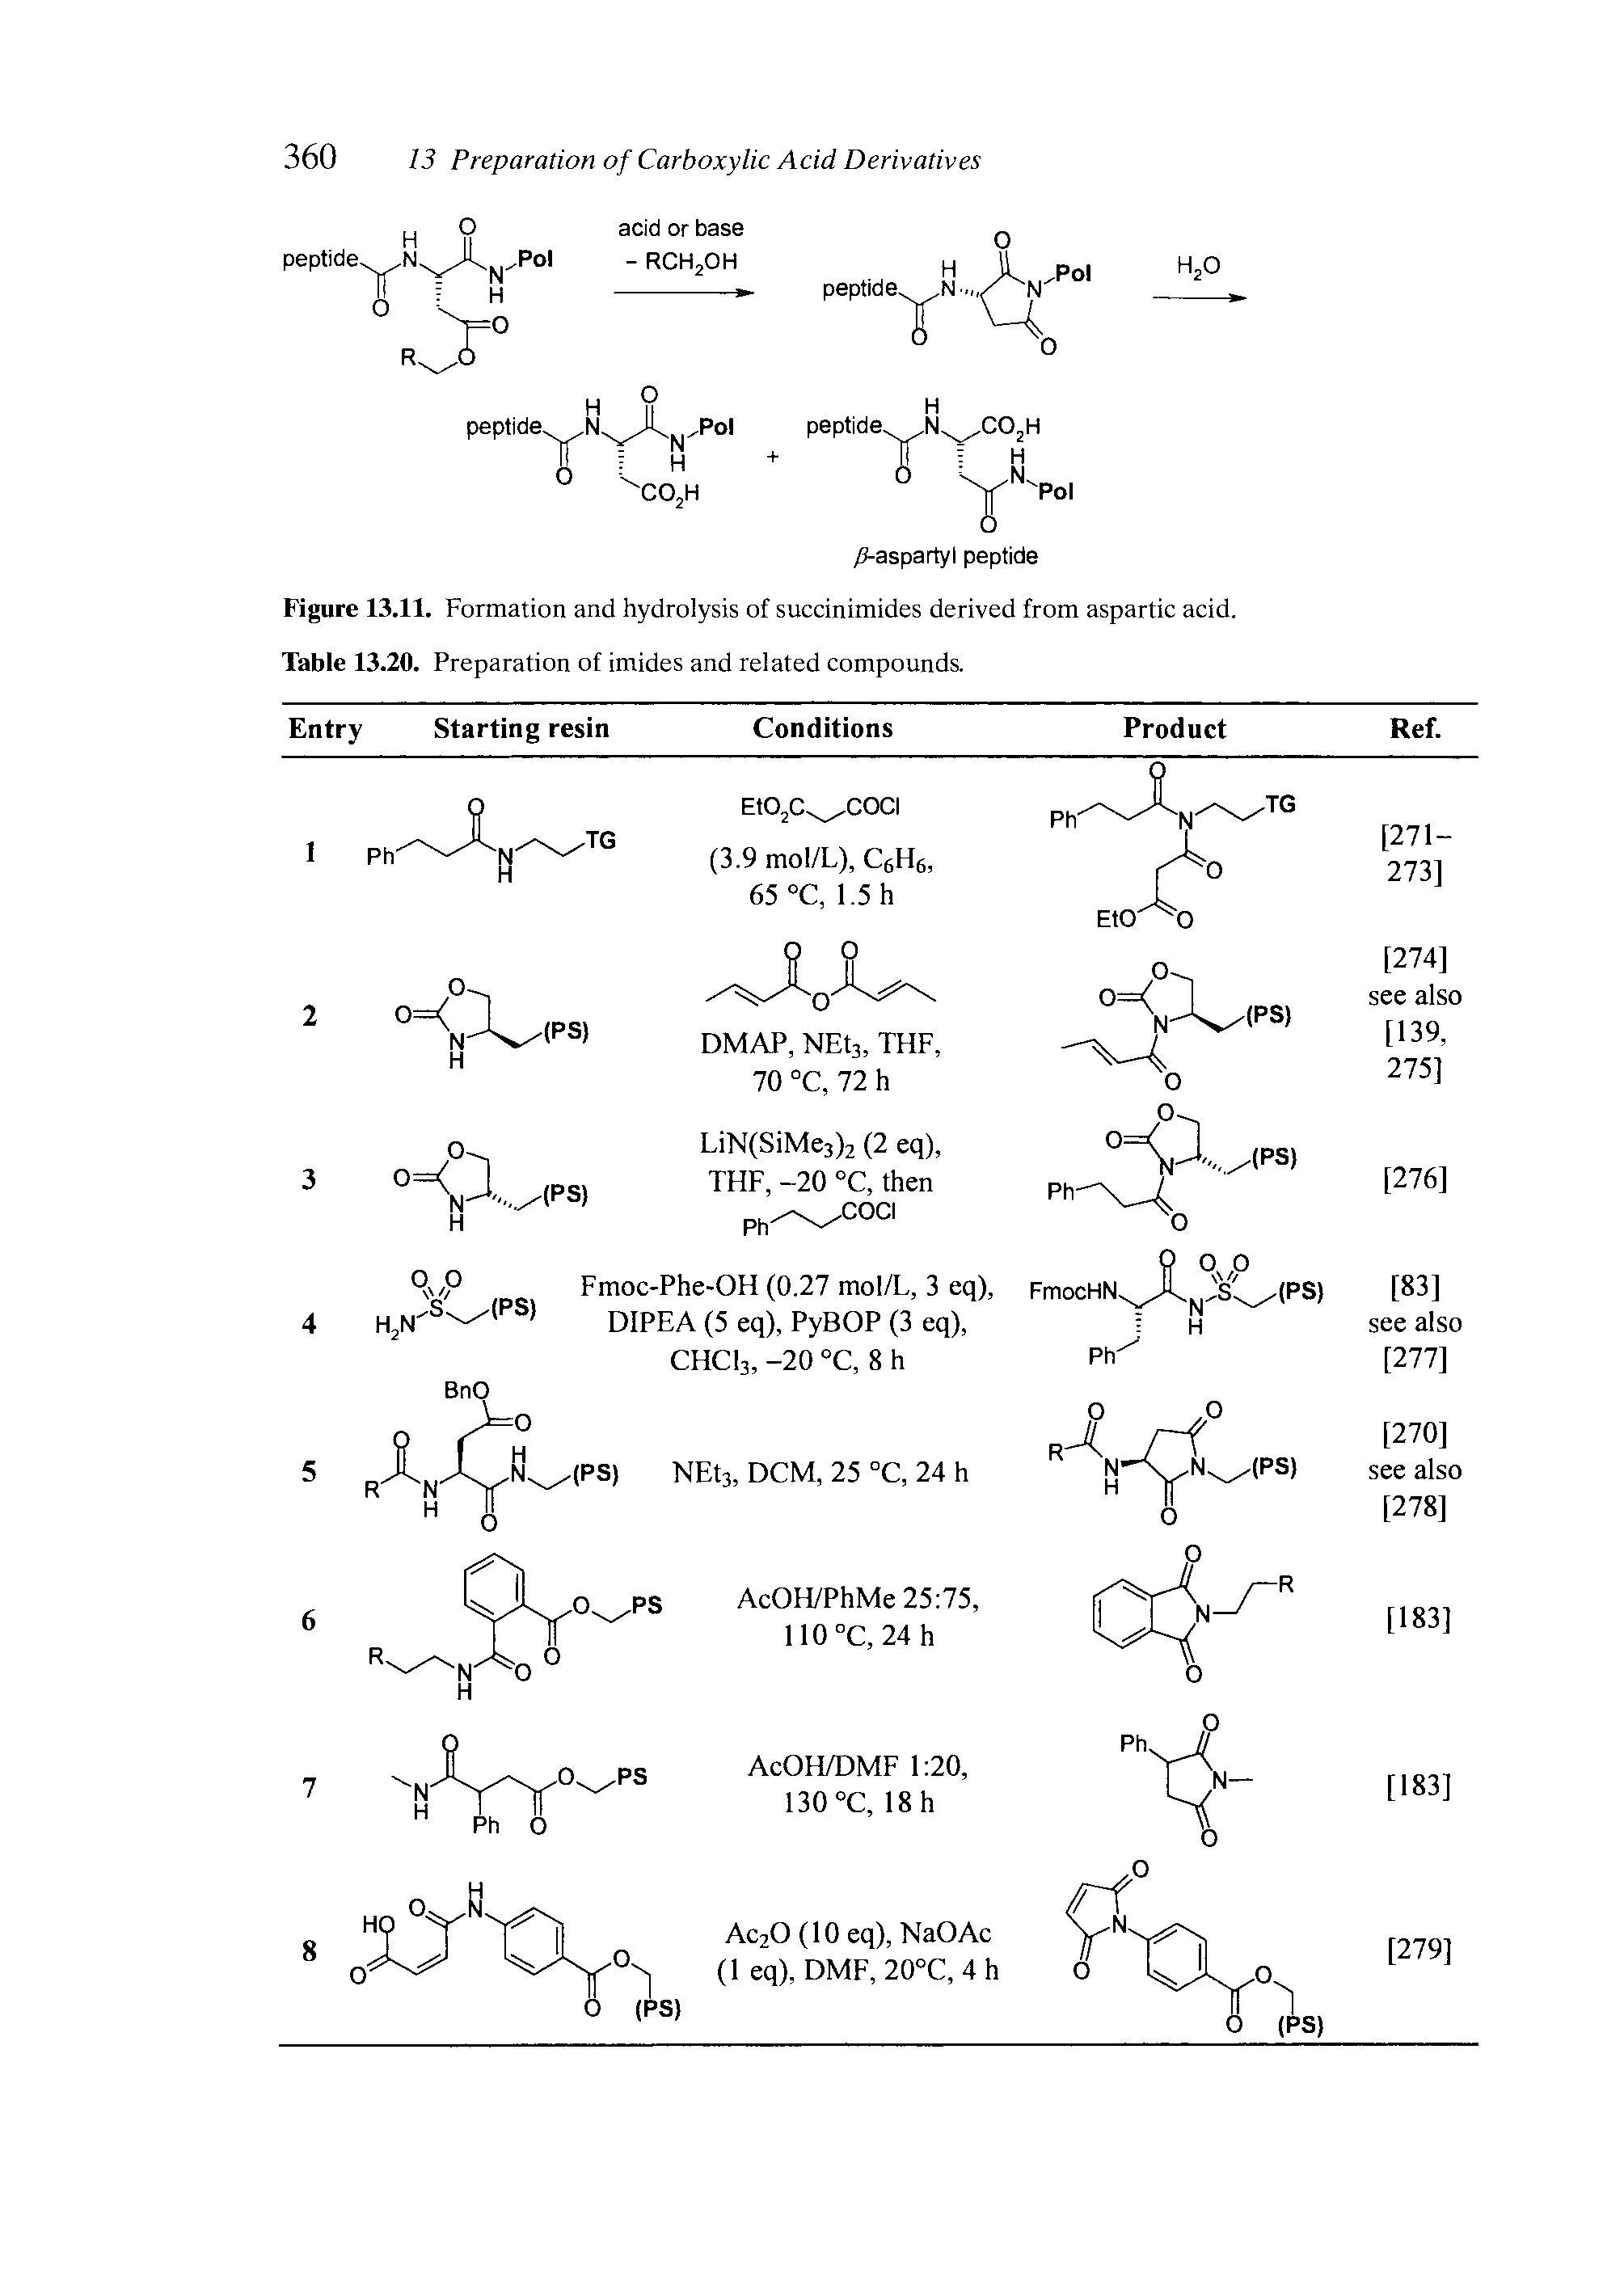 Figure 13.11. Formation and hydrolysis of succinimides derived from aspartic acid. Table 13.20. Preparation of imides and related compounds.